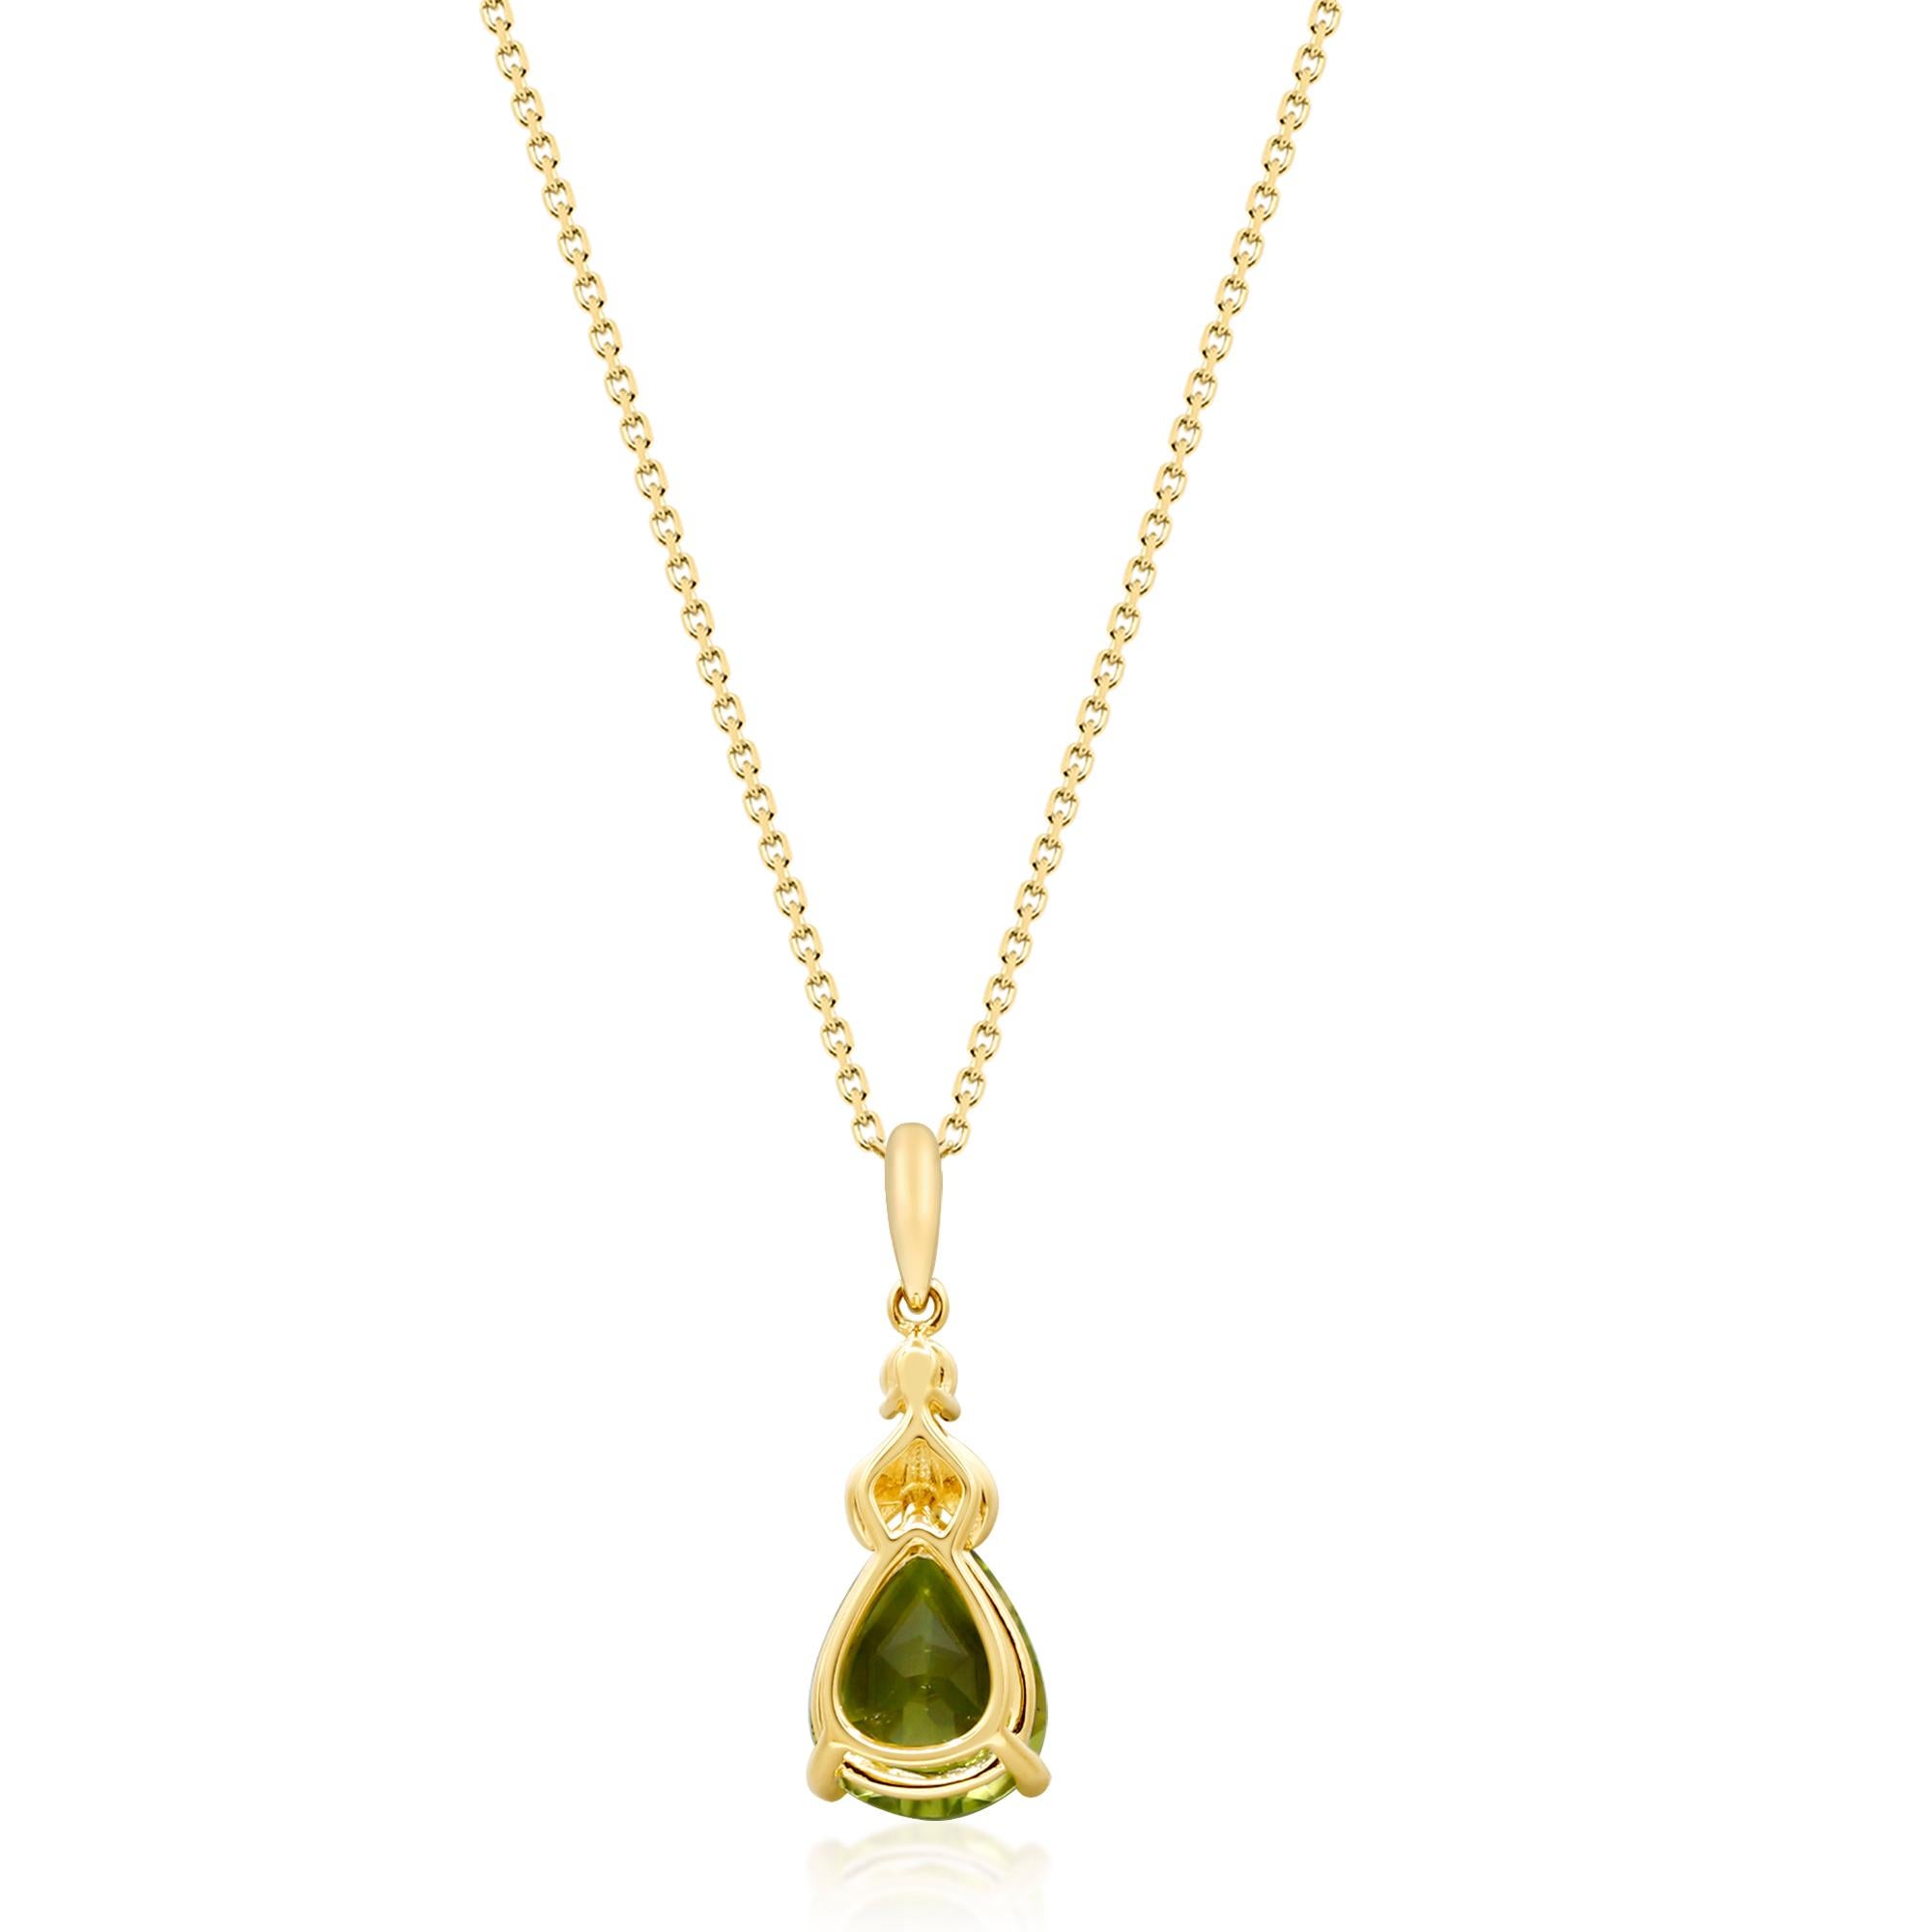 Pear Cut 1.75 Carat Pear-Cut Peridot with Diamond Accents 10K Yellow Gold Pendant For Sale